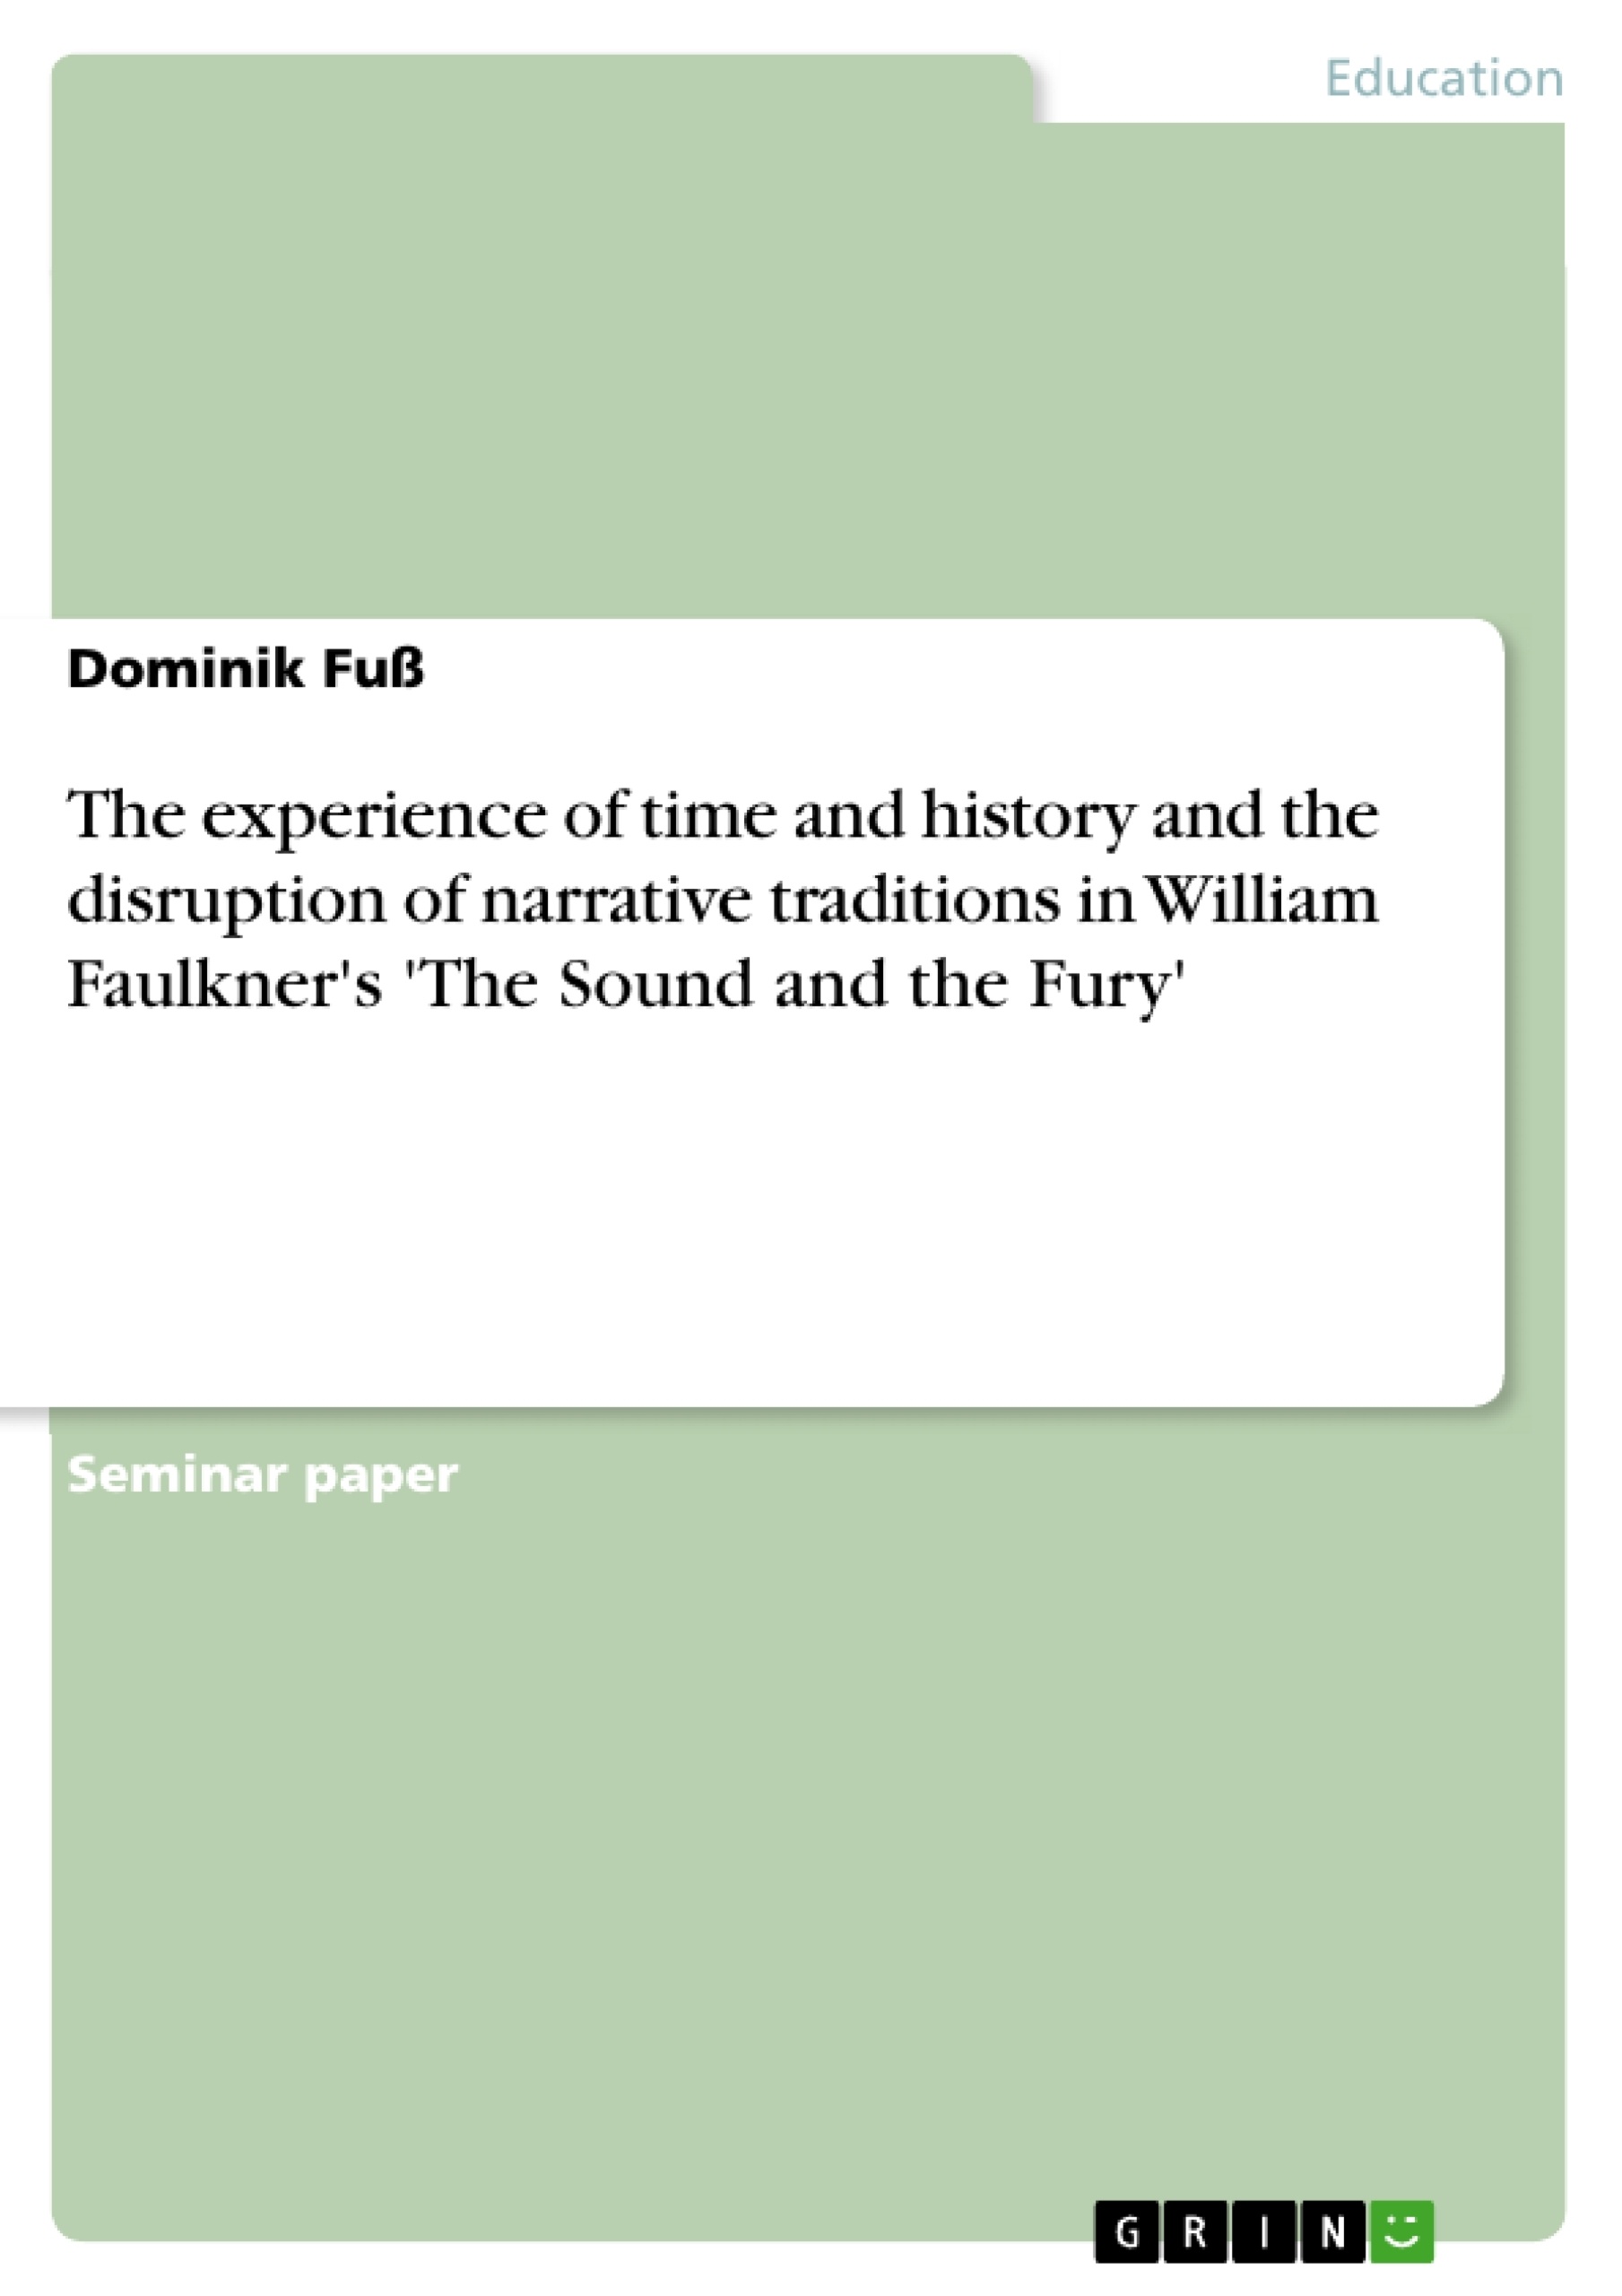 Title: The experience of time and history and the disruption of narrative traditions in William Faulkner's 'The Sound and the Fury'